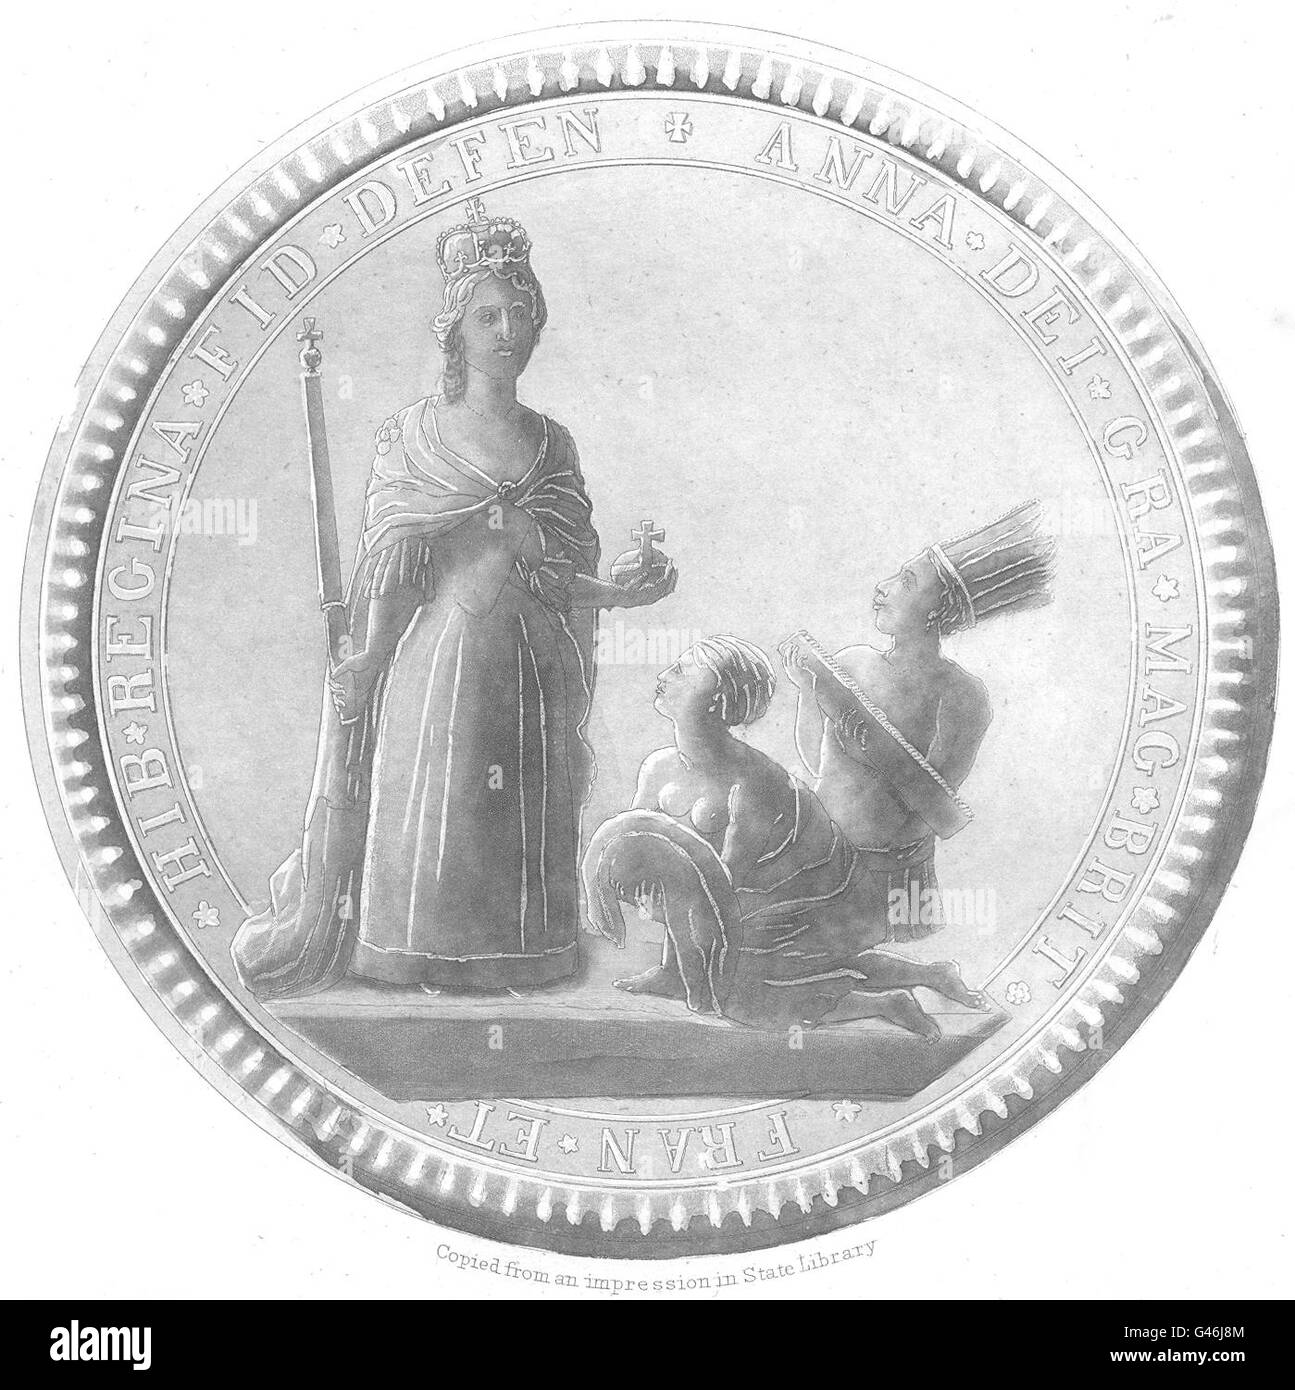 NEW YORK STATE: Great Seal of the Province of New York 1710 to 1718-front, 1851 Stock Photo